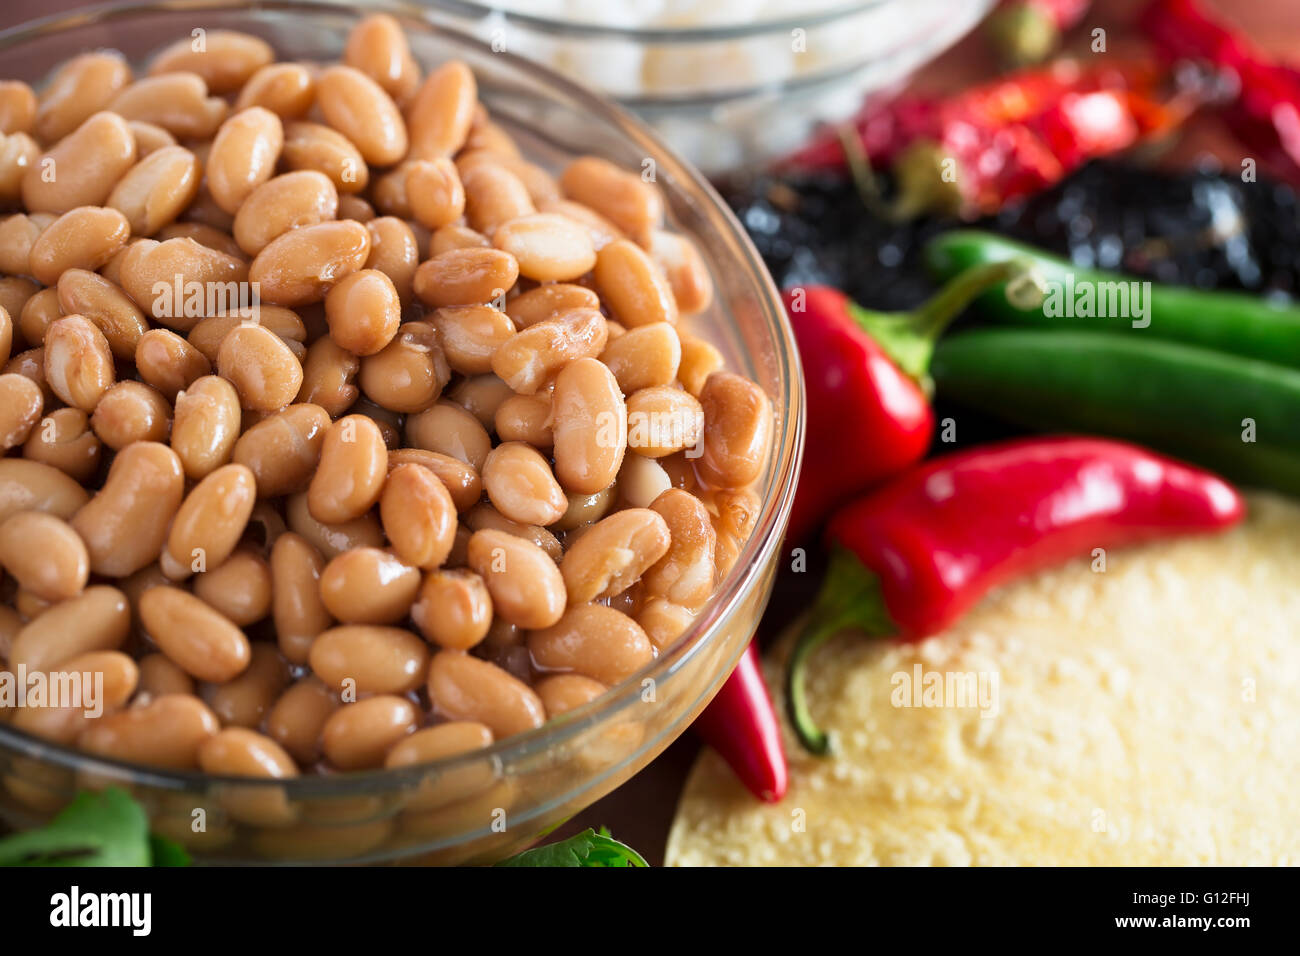 Cooked pinto beans and other ingredients for Mexican cooking. Stock Photo